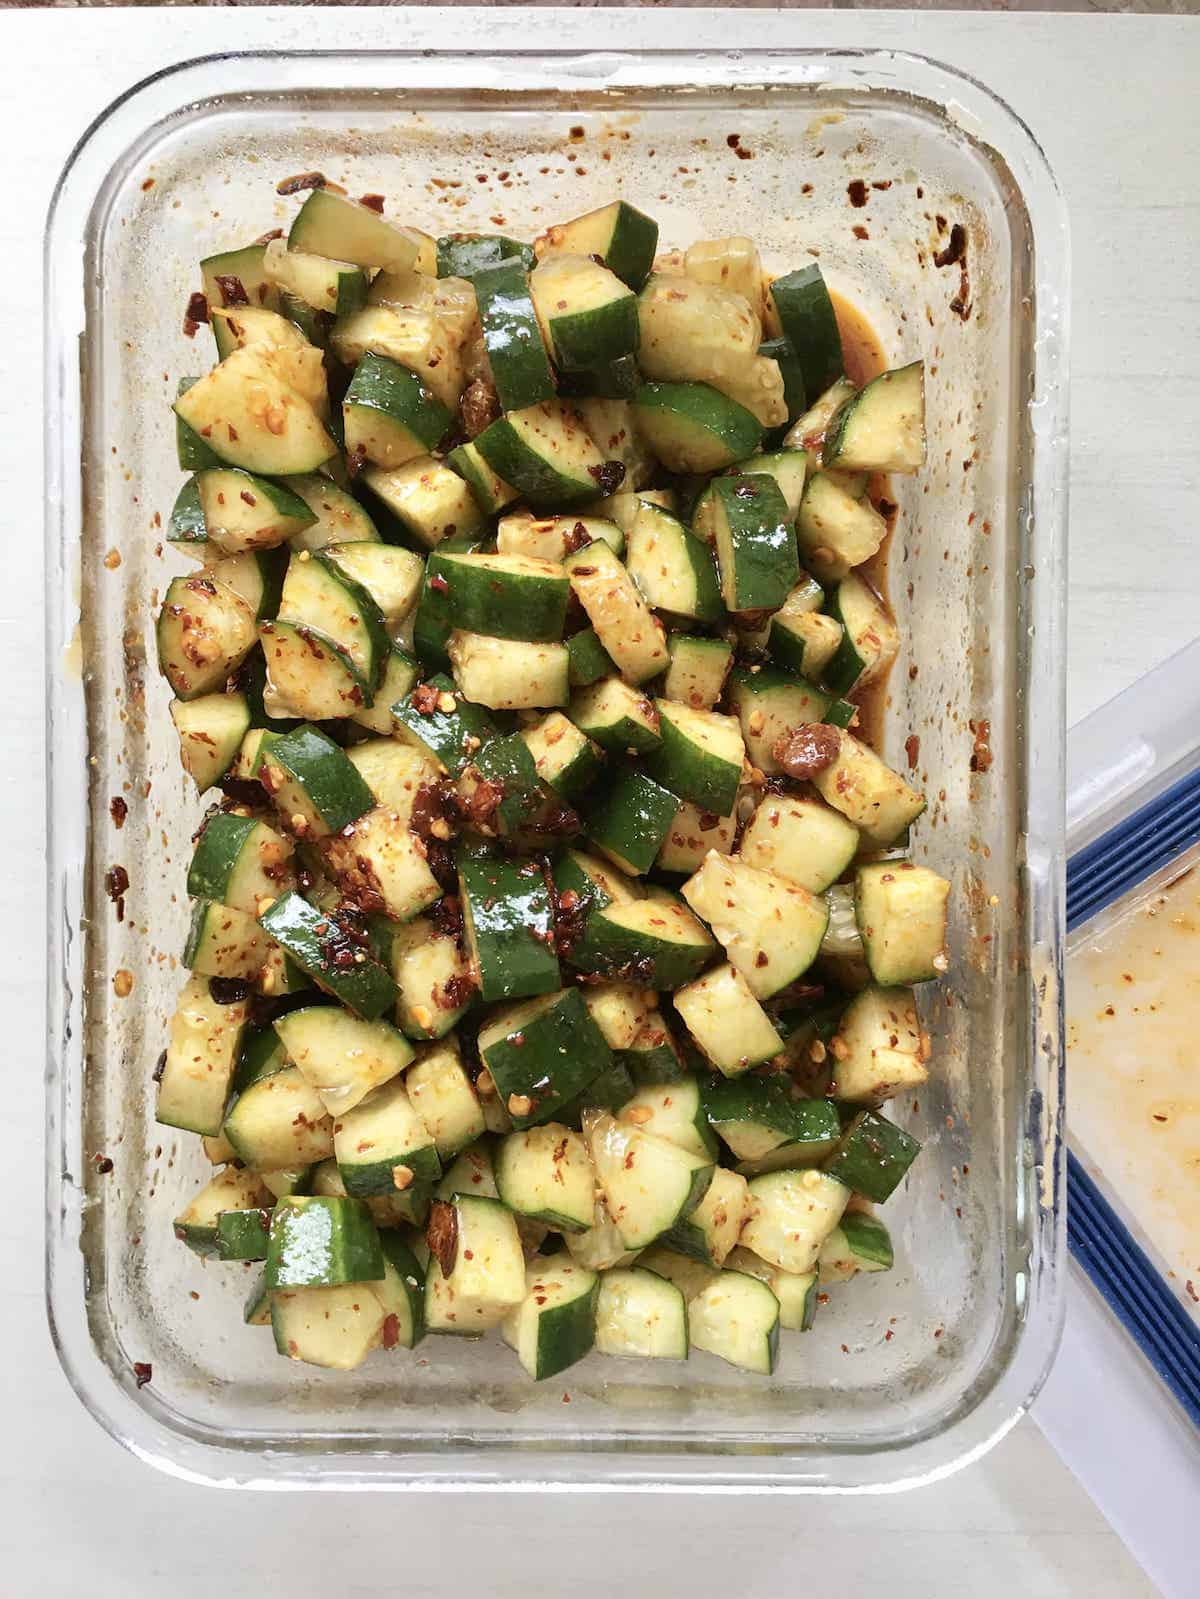 Tossed cubed cucumbers in a spicy Chinese dressing.